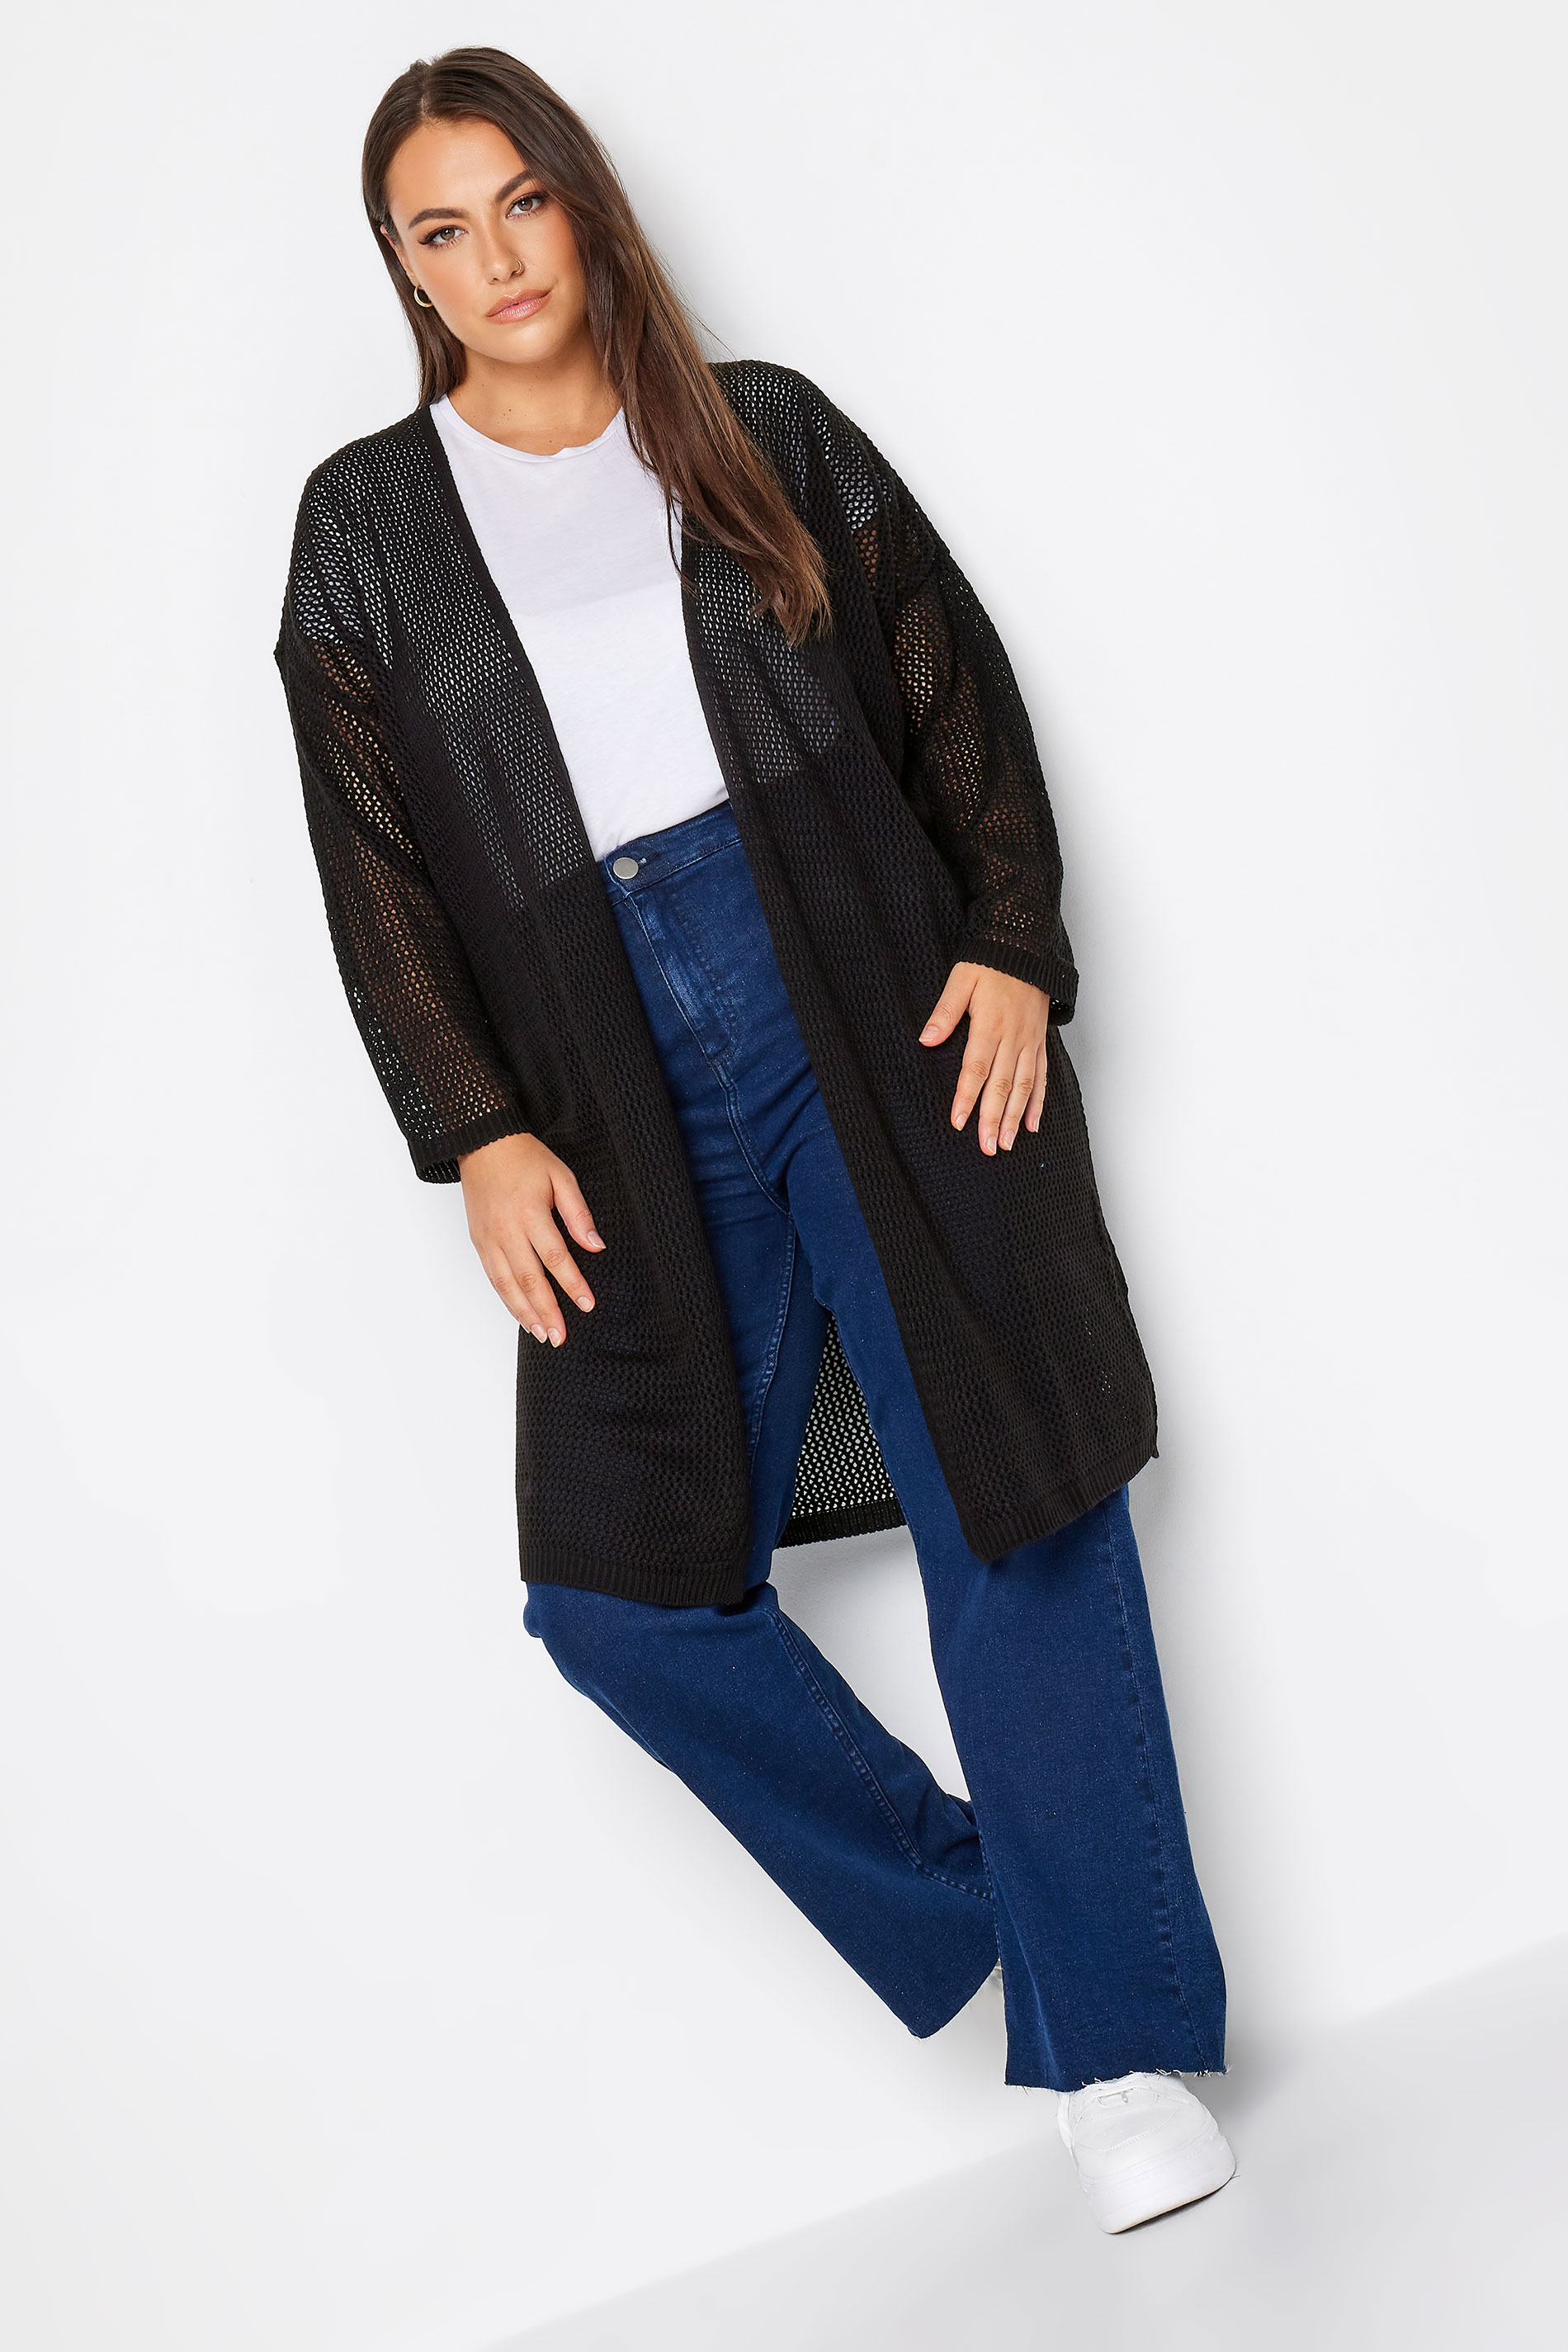 YOURS Curve Plus Size Black Mesh Cardigan | Yours Clothing  2